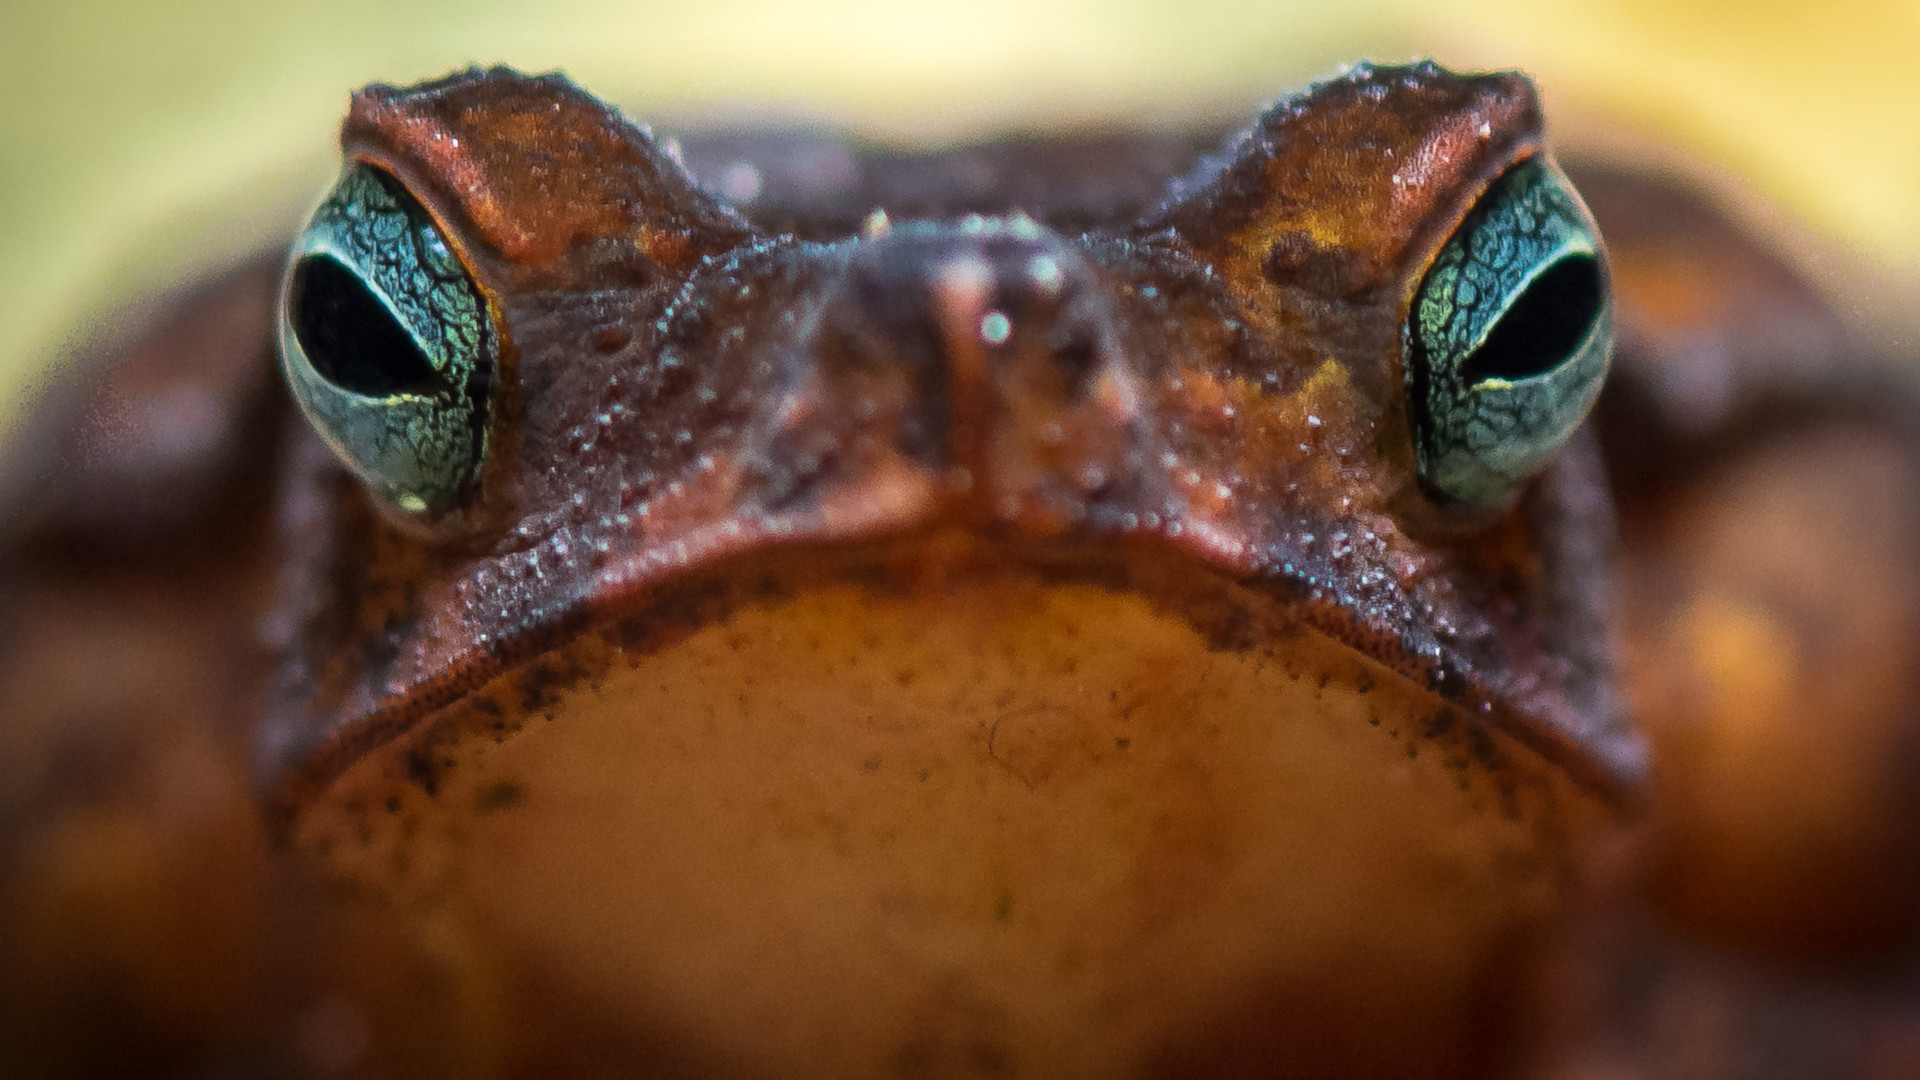 Close-up of a red toad's face